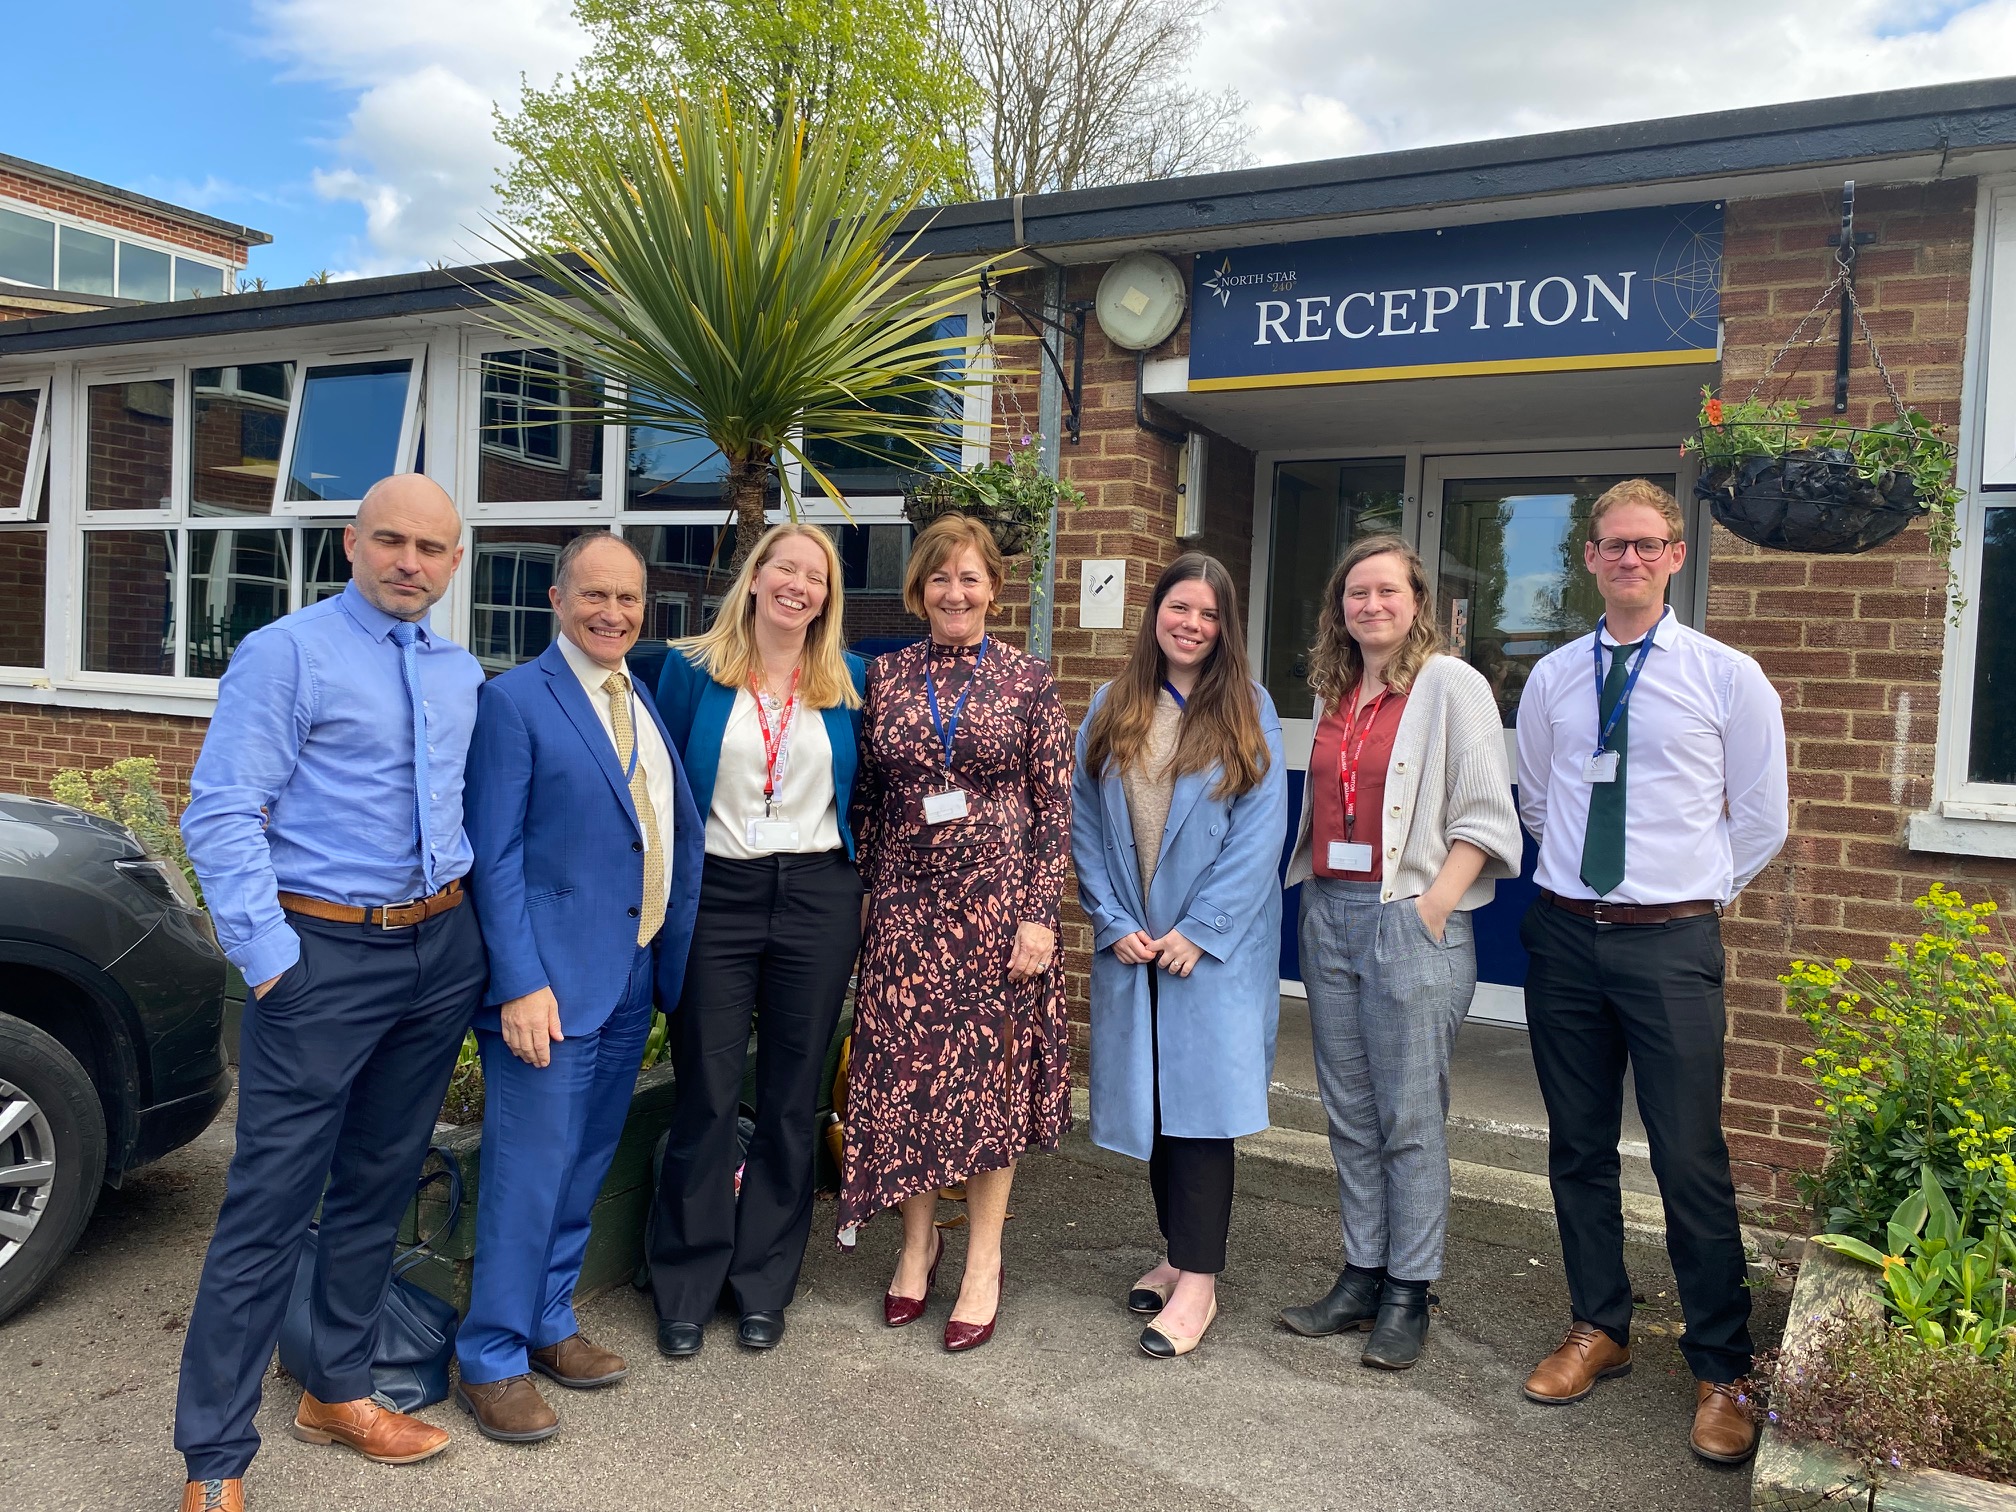 North Star Academy Trust hosts visit from South West Regional Director Lucy Livings